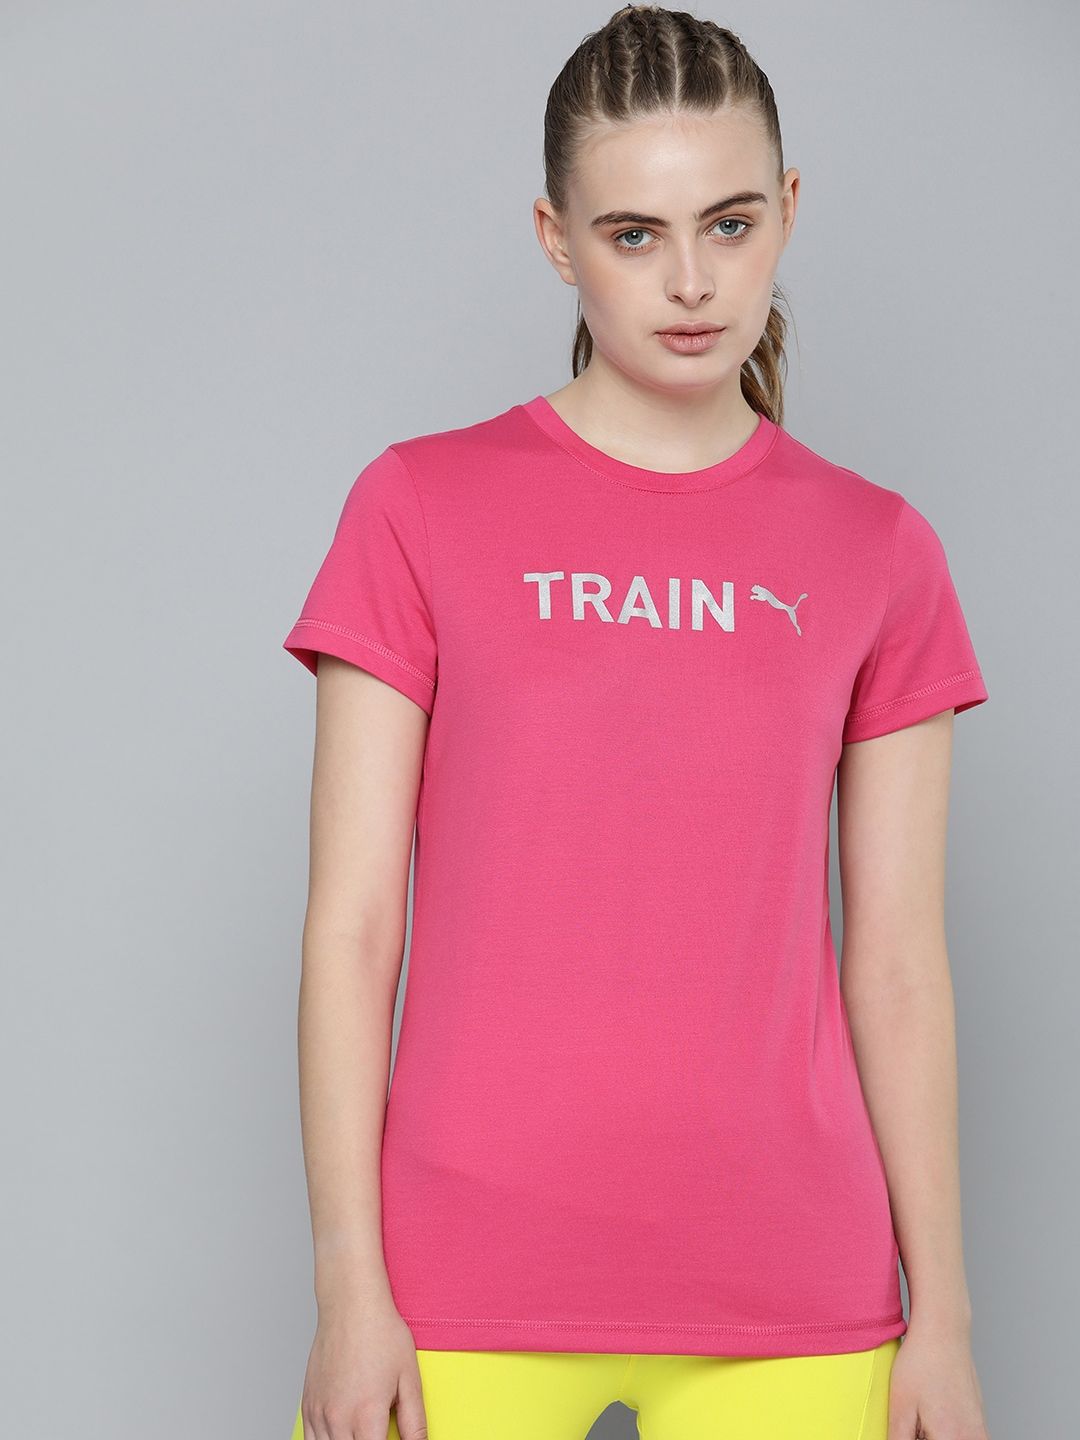 Puma Typography Printed Dry- Cell Training or Gym Regular fit T-shirt Price in India